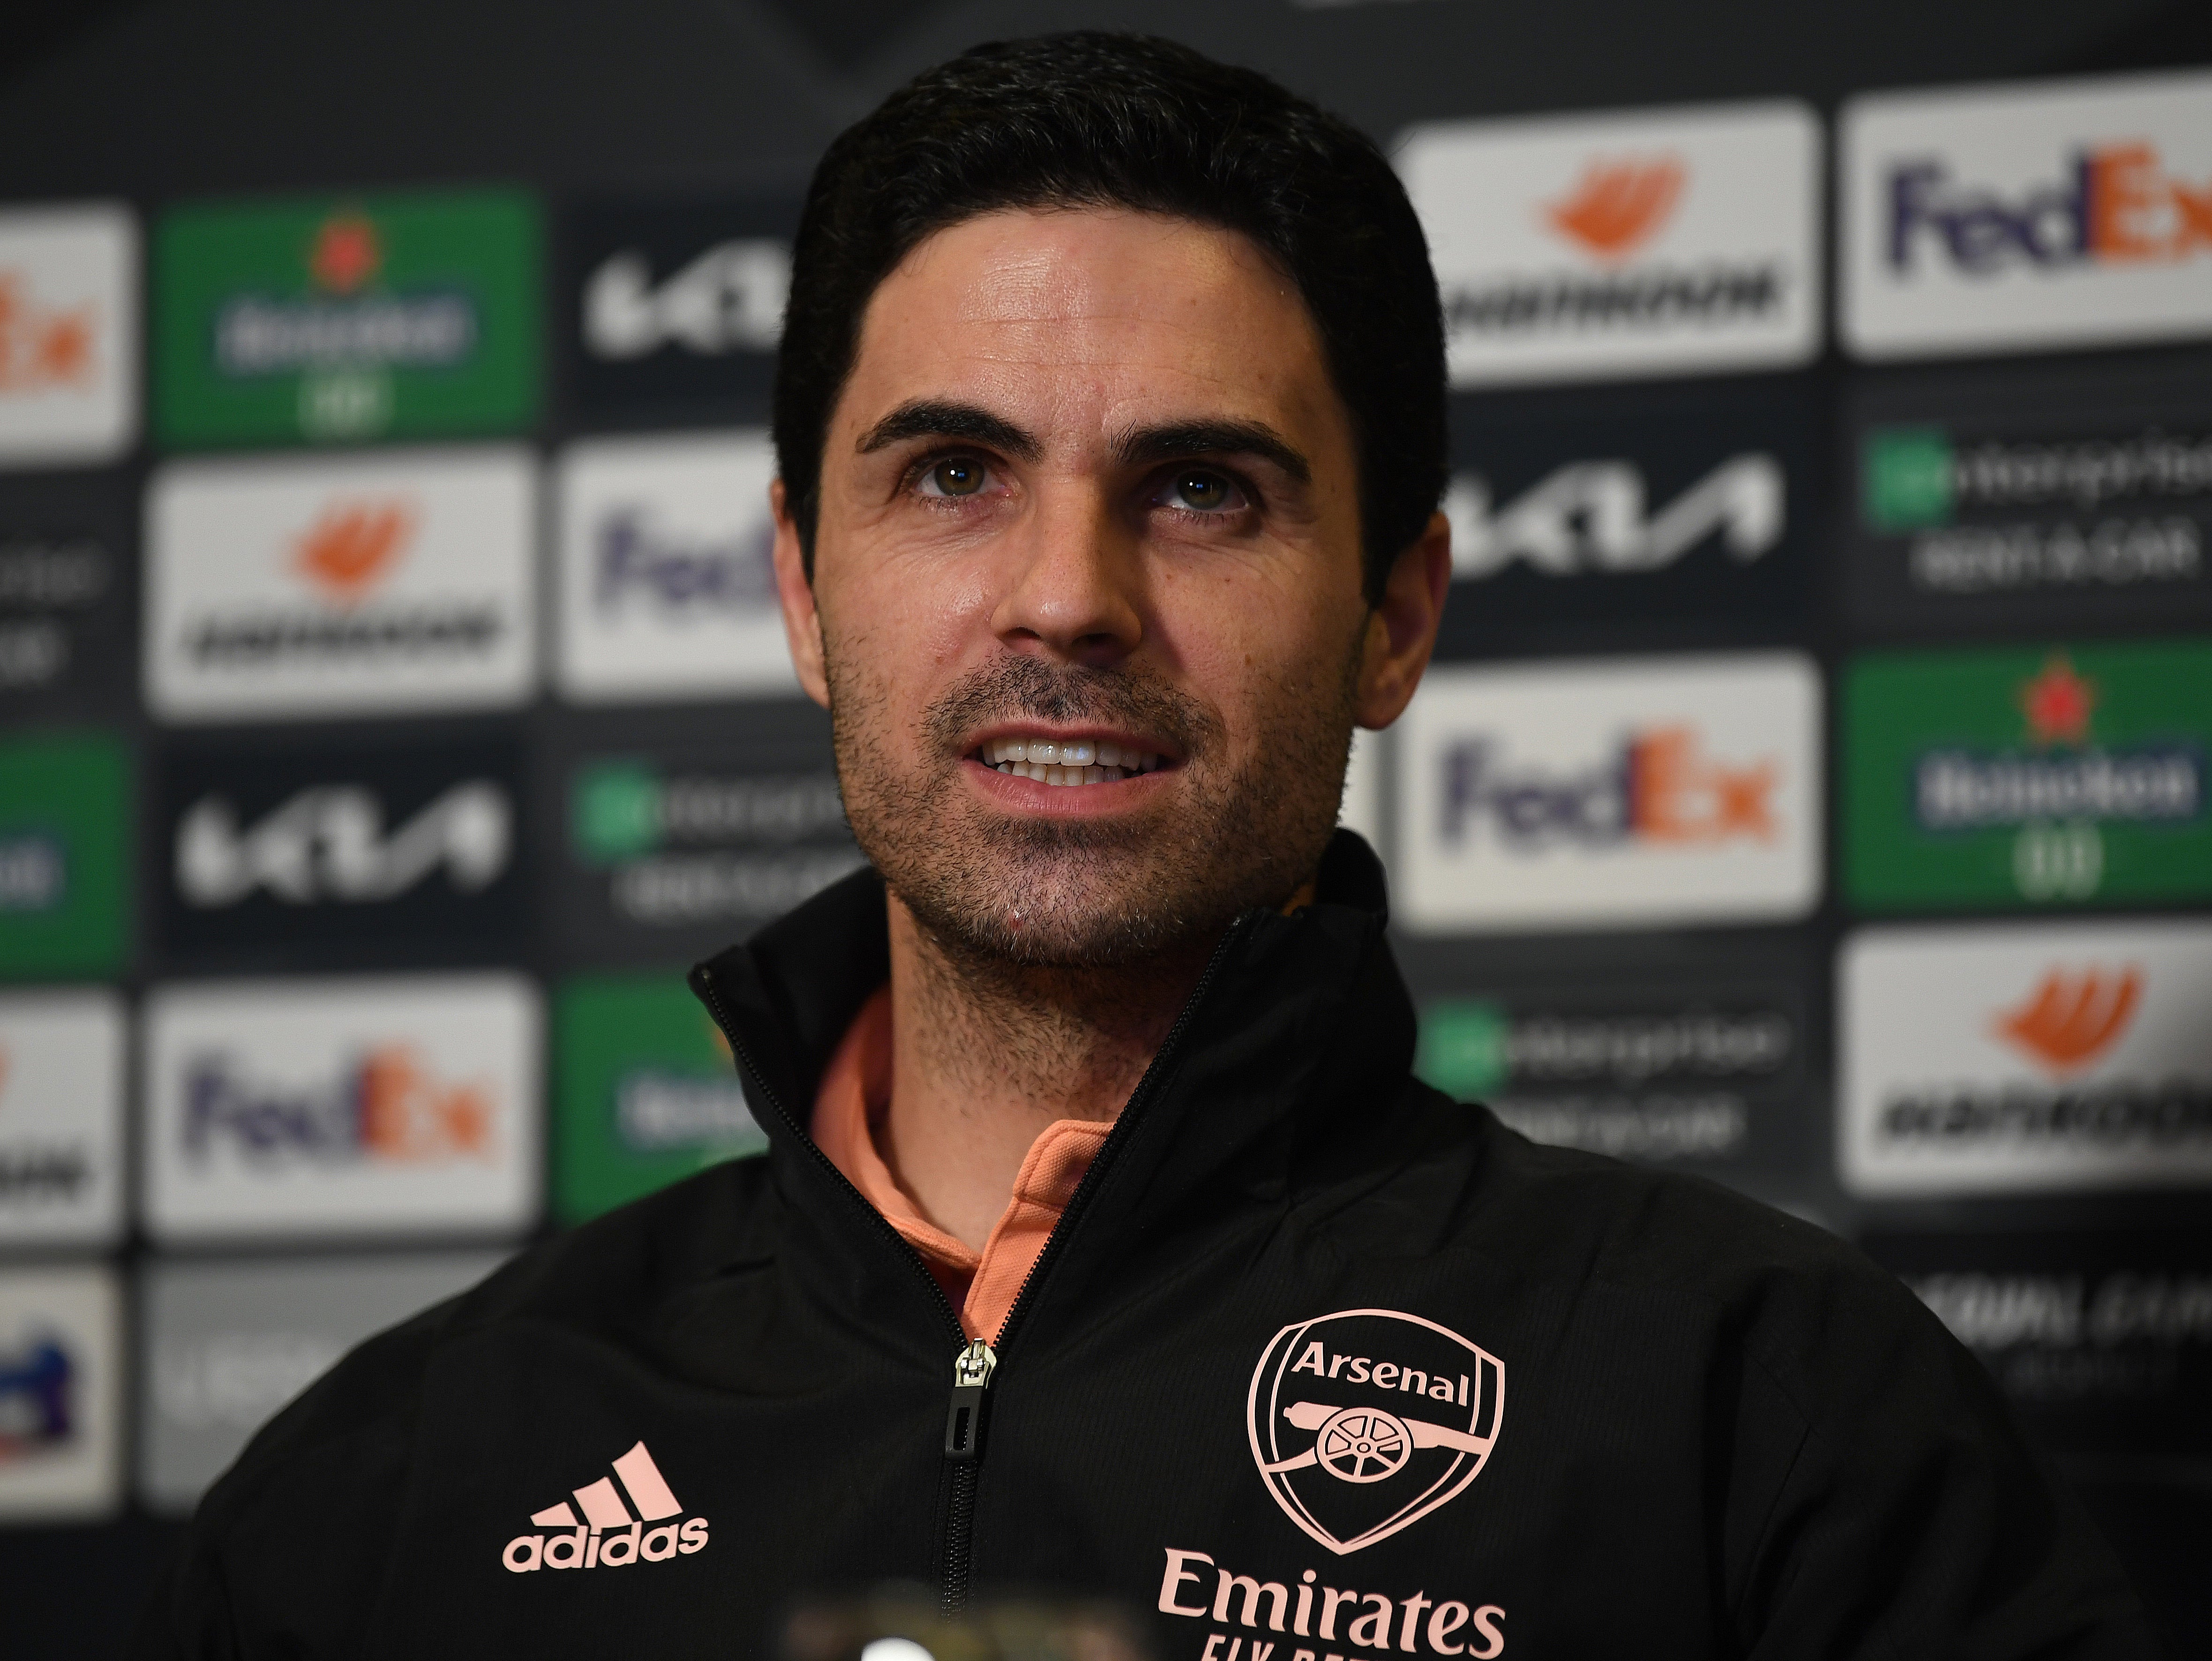 Mikel Arteta is committed to Arsenal